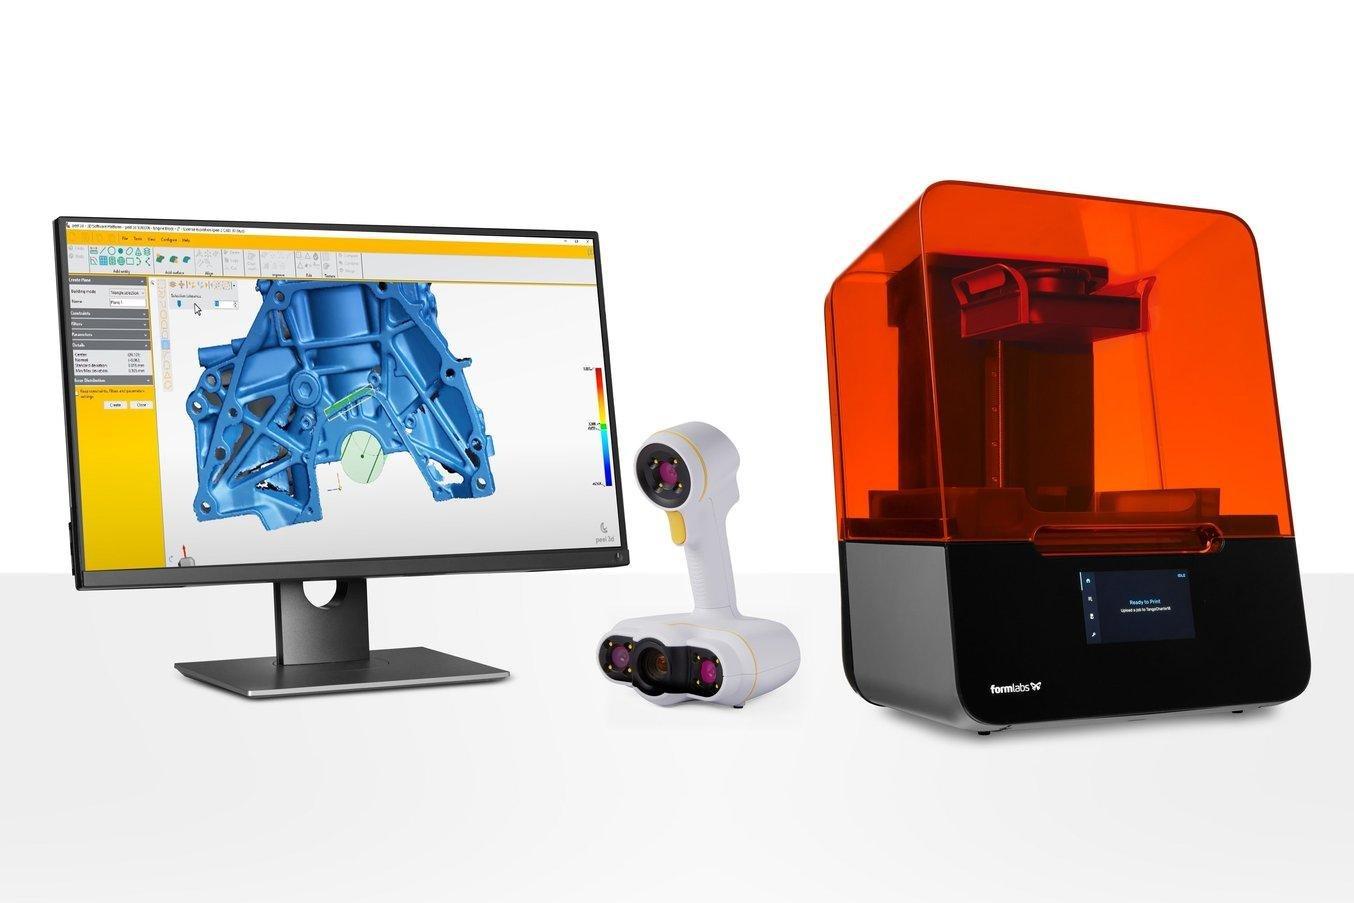 Desktop SLA 3D printers are ideal for turning reverse-engineered designs into physical parts.